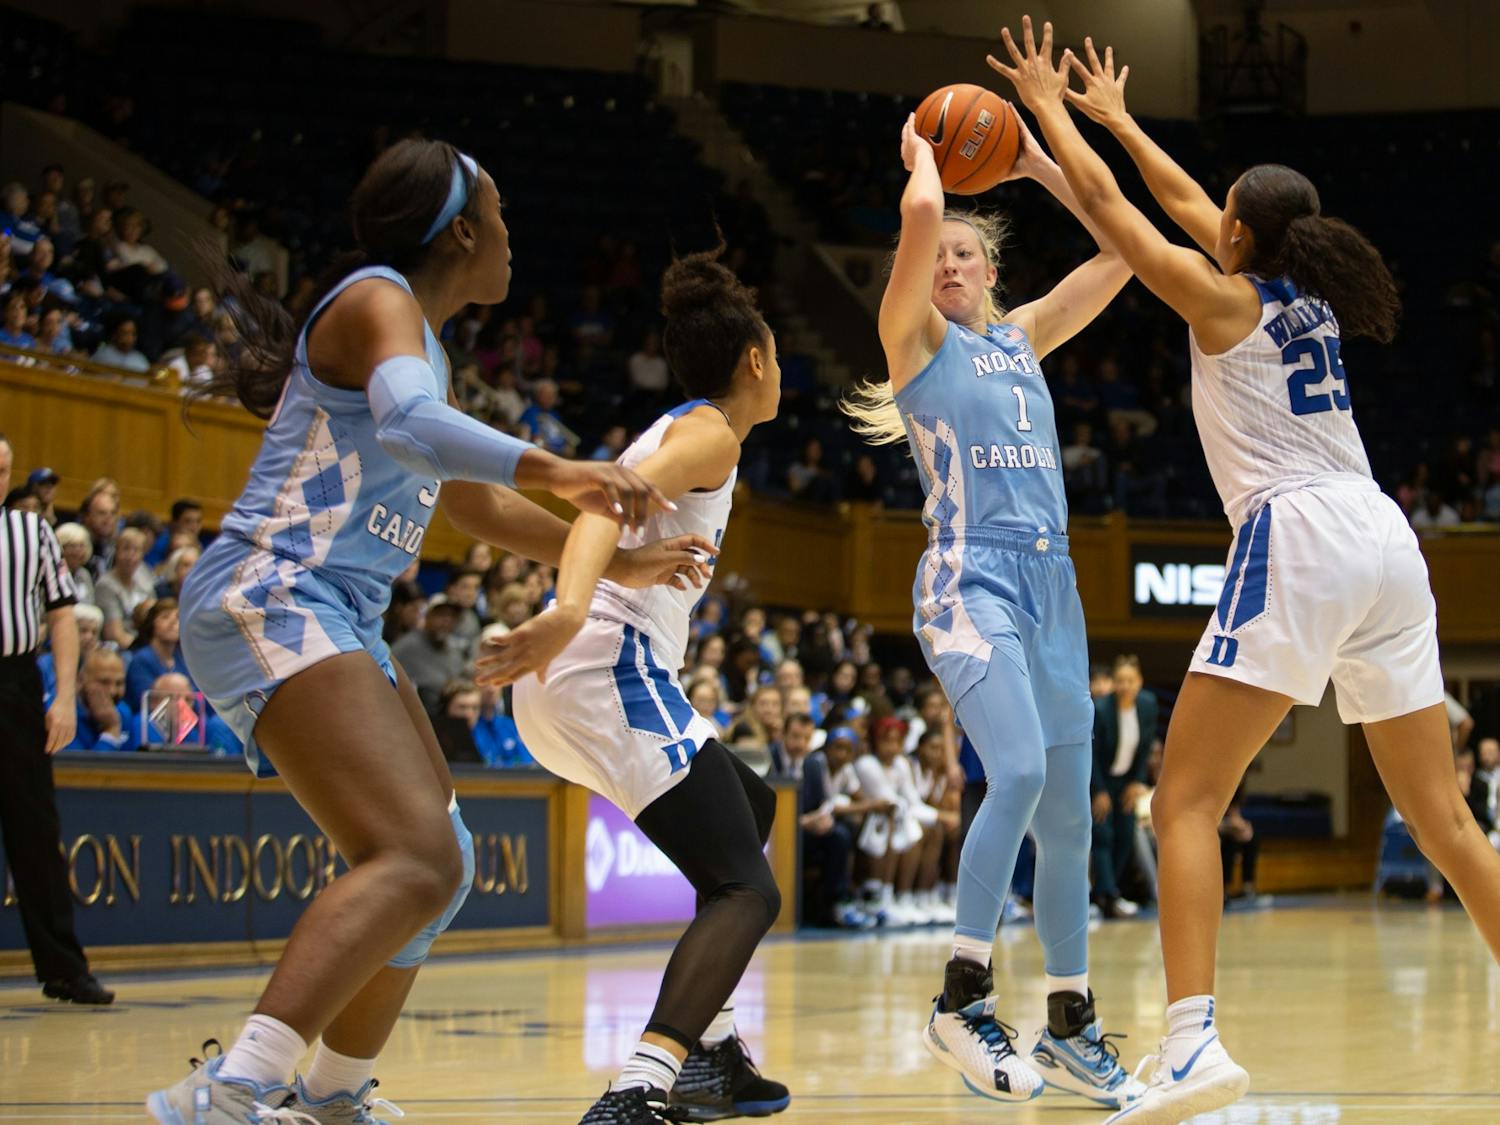 UNC senior guard Taylor Koenen (1) shoots while being defended by Duke  junior forward/center Jade Williams (25).  The Tar Heels lost to Duke 61-71 in Cameron Indoor Stadium on Thursday, Feb. 6, 2020.